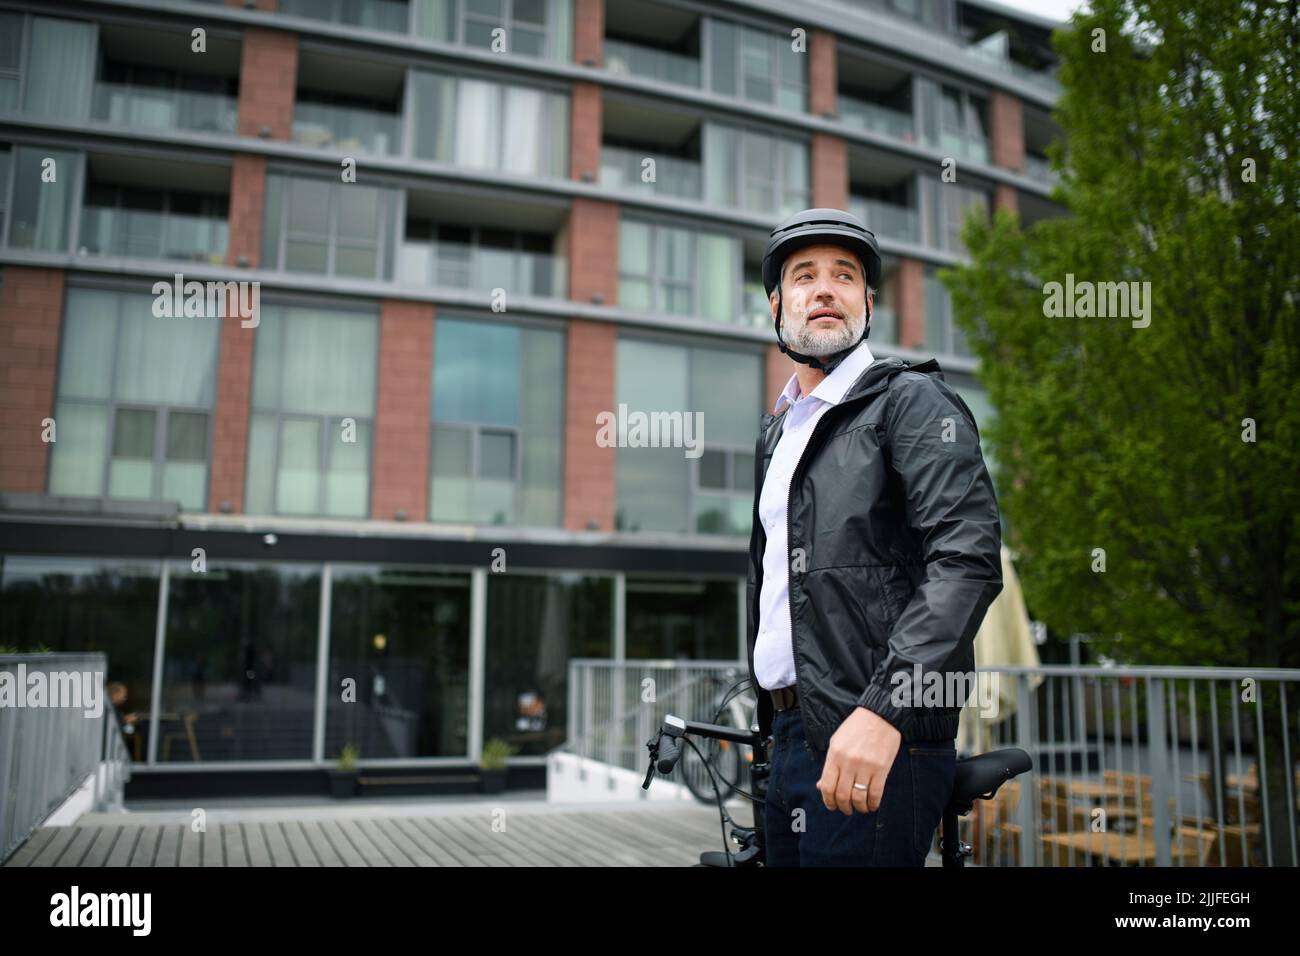 Businessman commuter on the way to work, pushing bike, sustainable lifestyle concept. Stock Photo